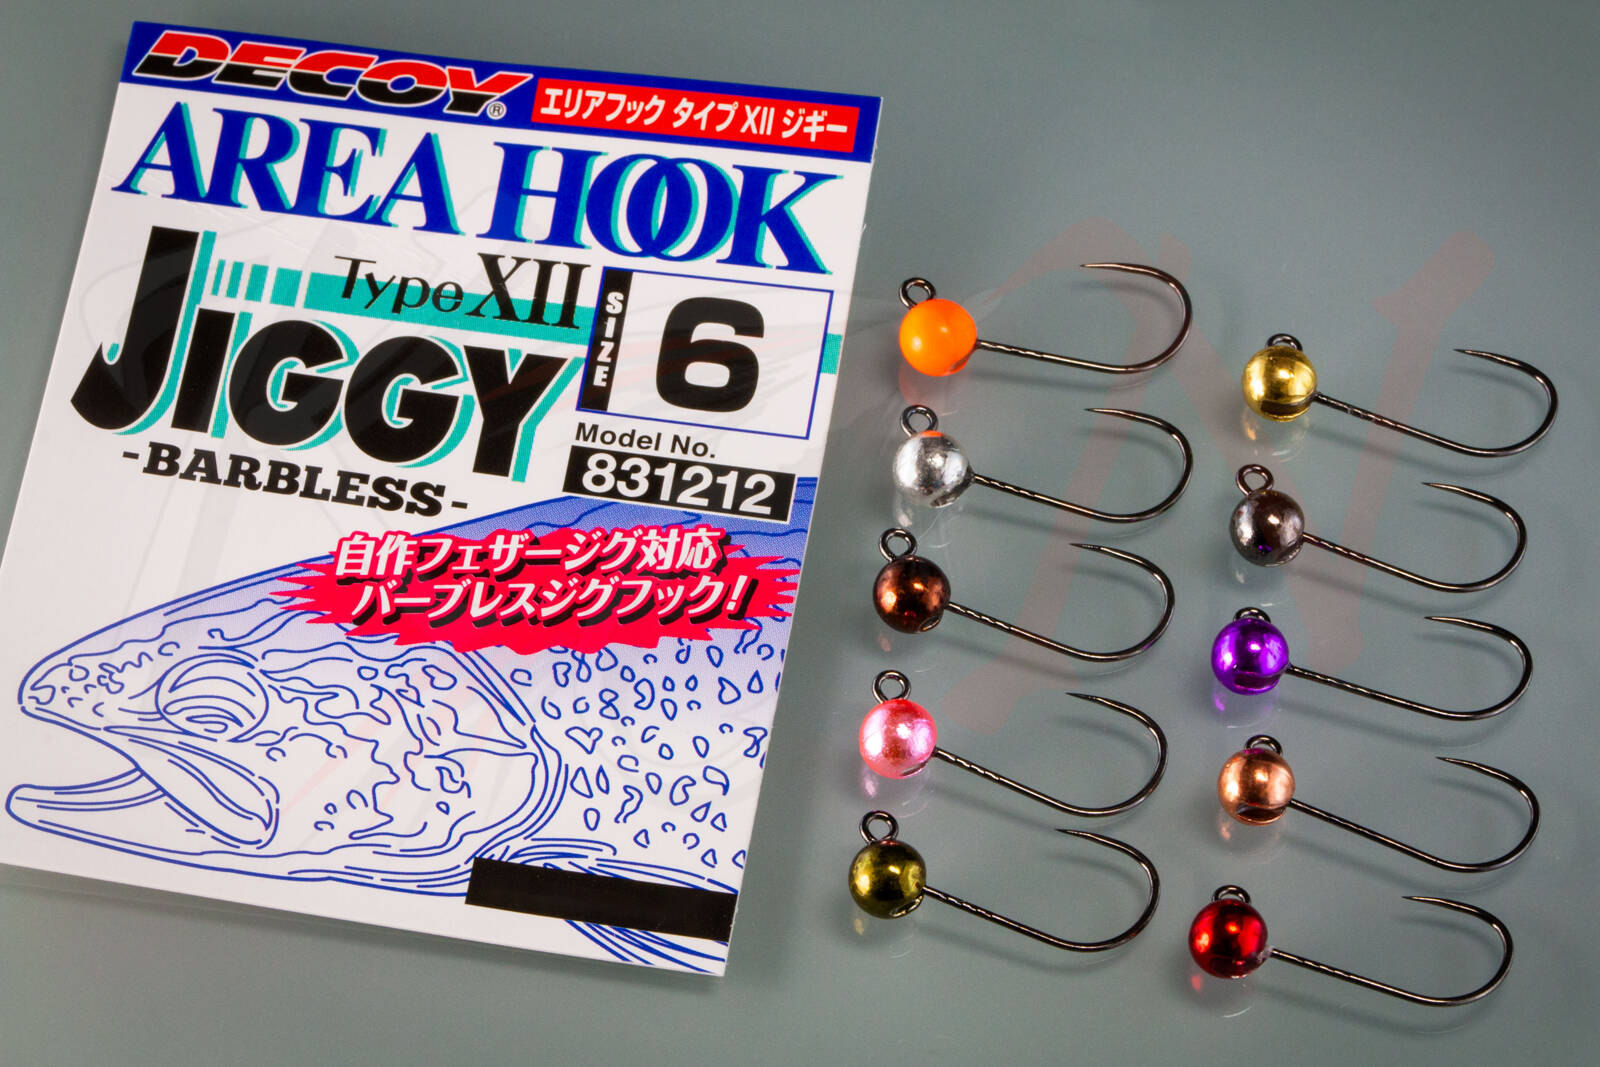 Decoy Trout Area jig hooks #6 with tungsten bead - 5.5mm, 1.35g, 5 pcs -  online webshop